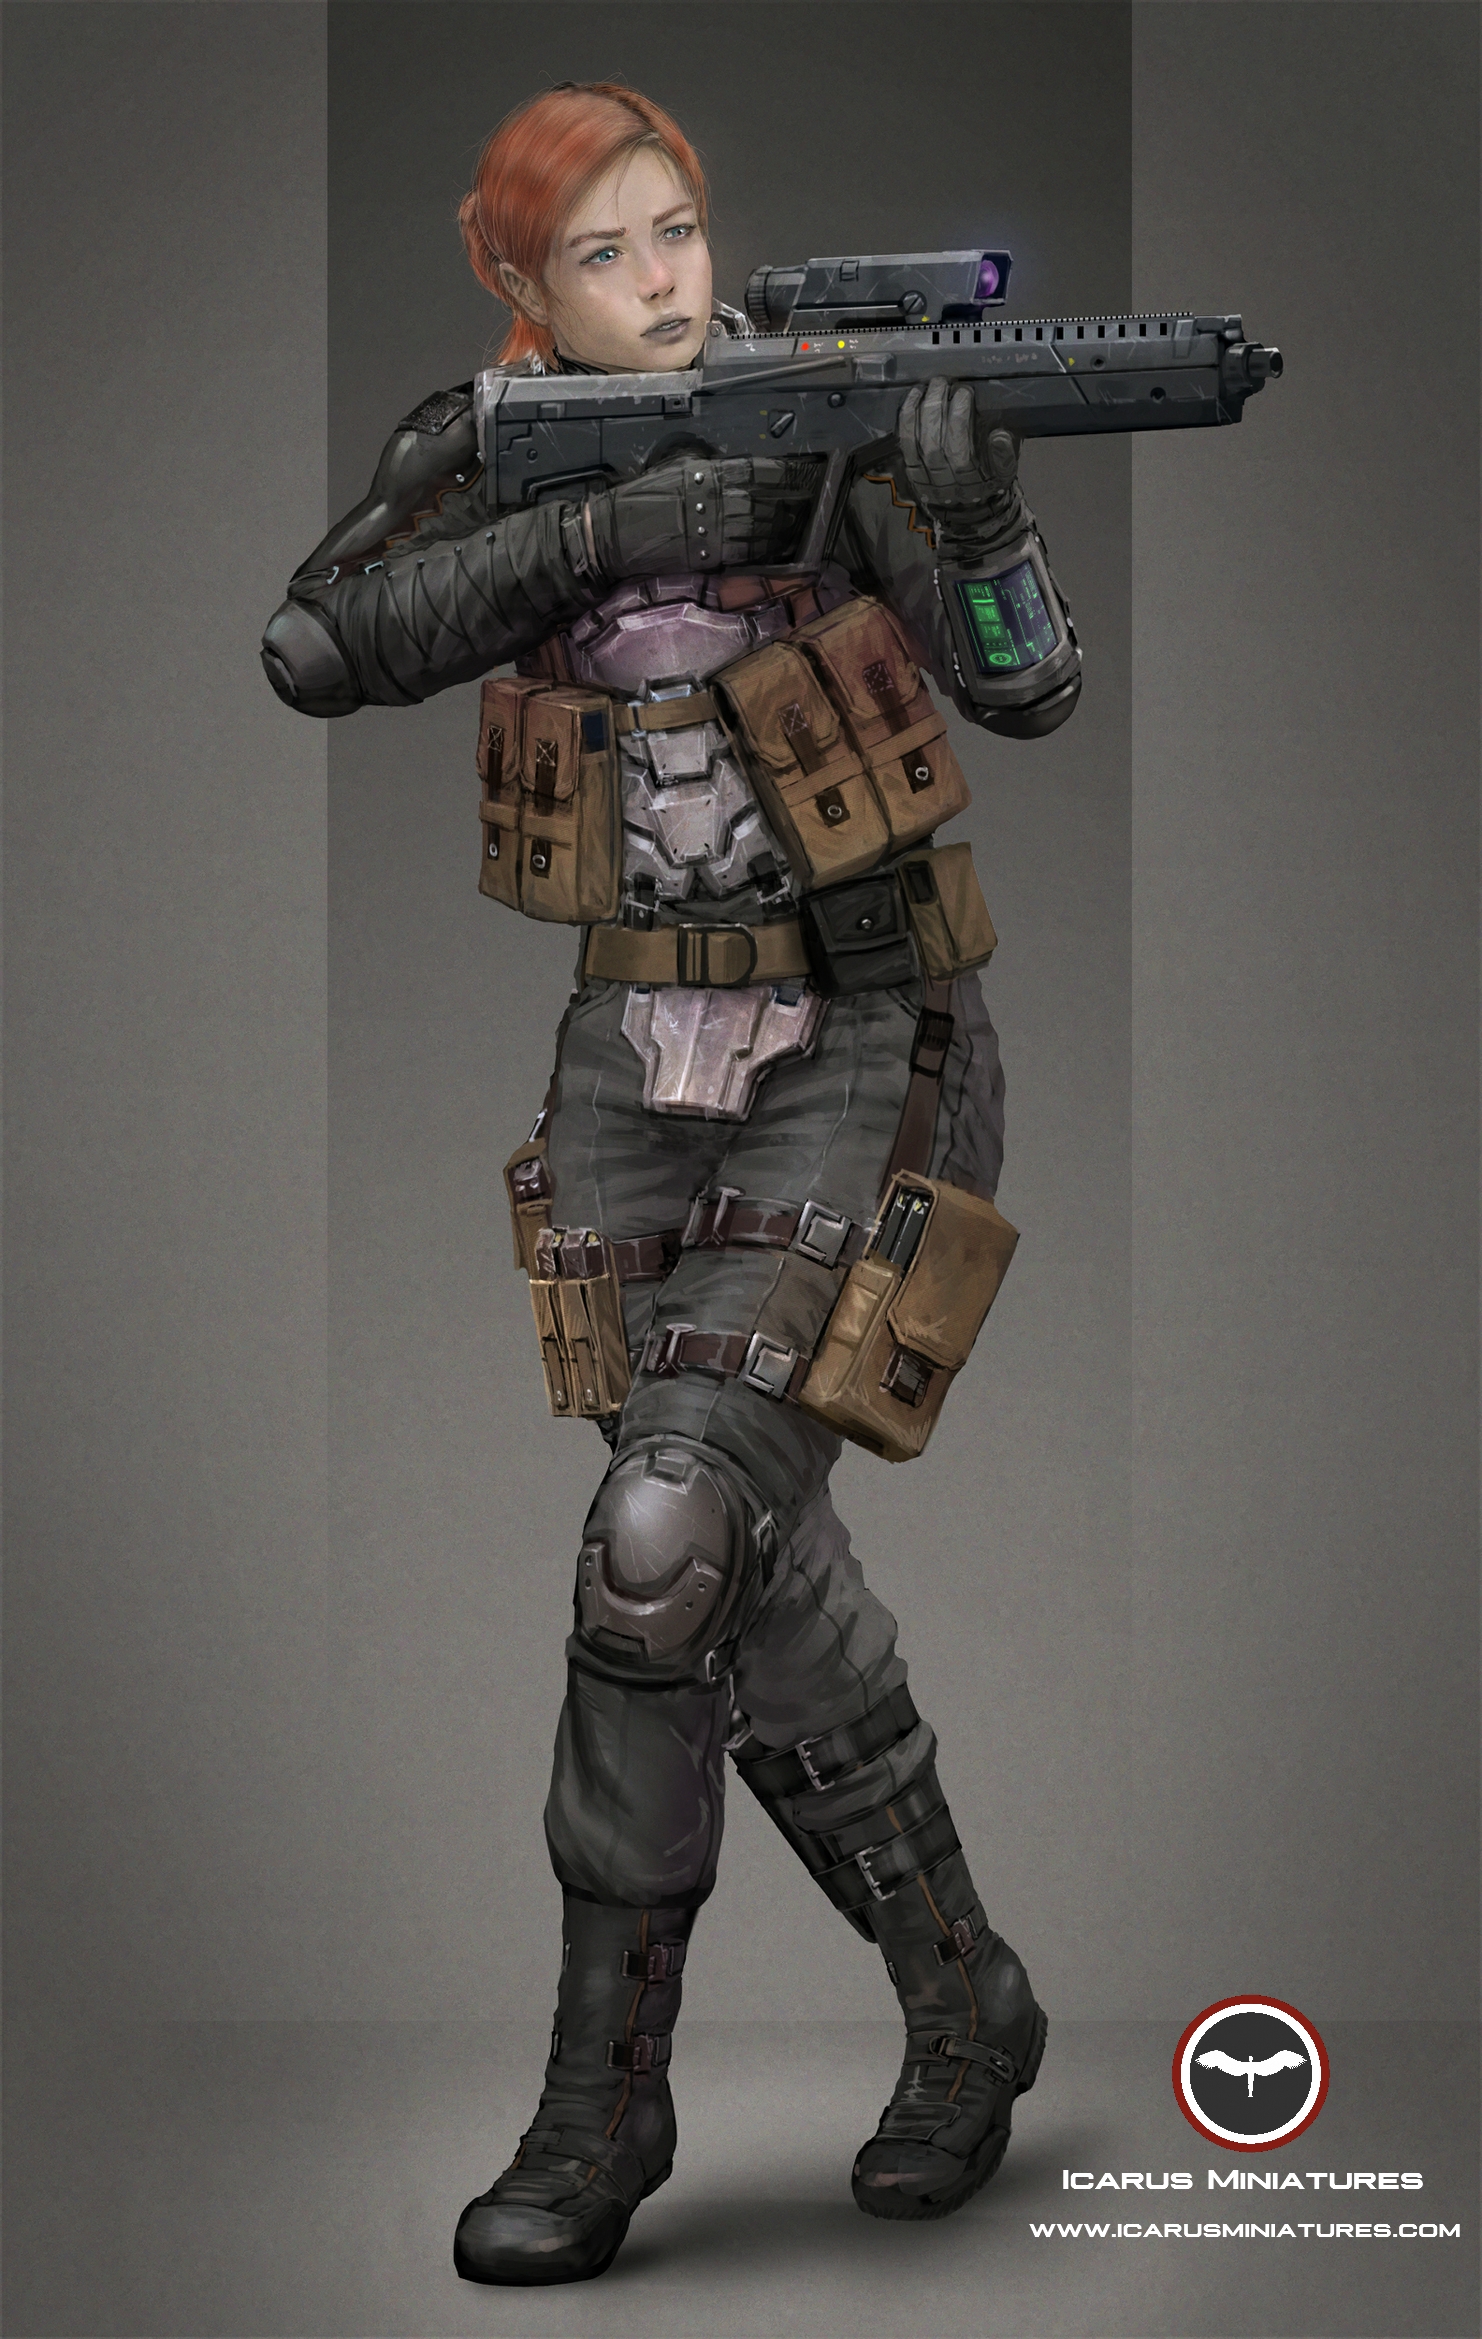 The female alliance trooper from Icarus Miiatures for their upcoming sci-fi skirmish wargame, the Icarus Project